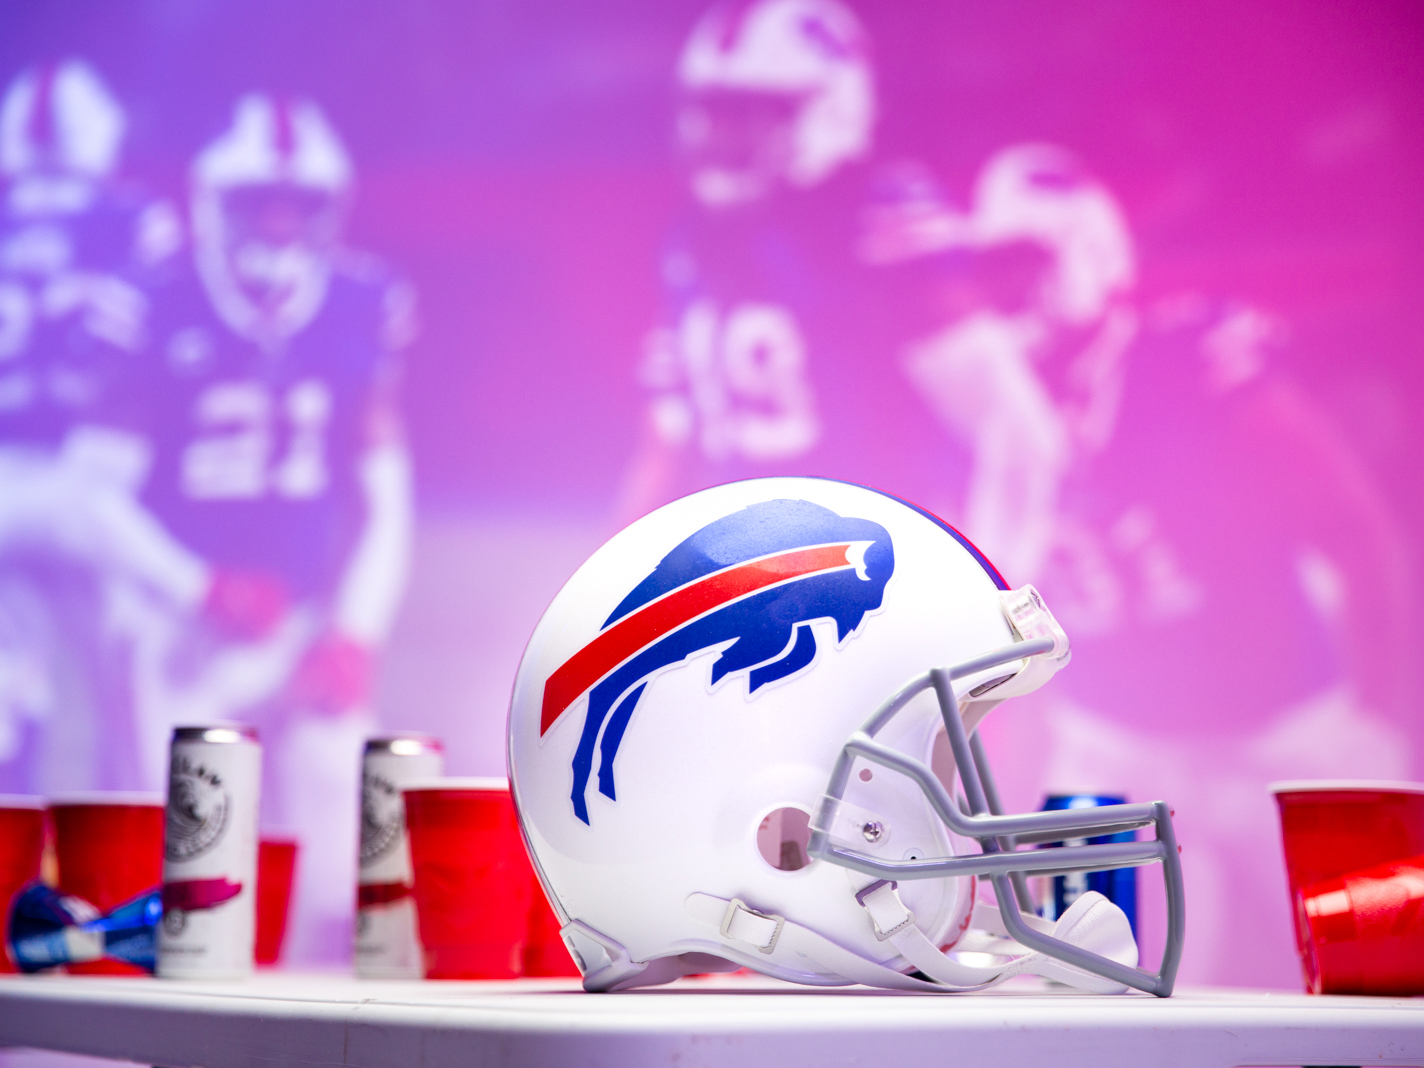 A Buffalo Bills helmet on a table in front of images of football players